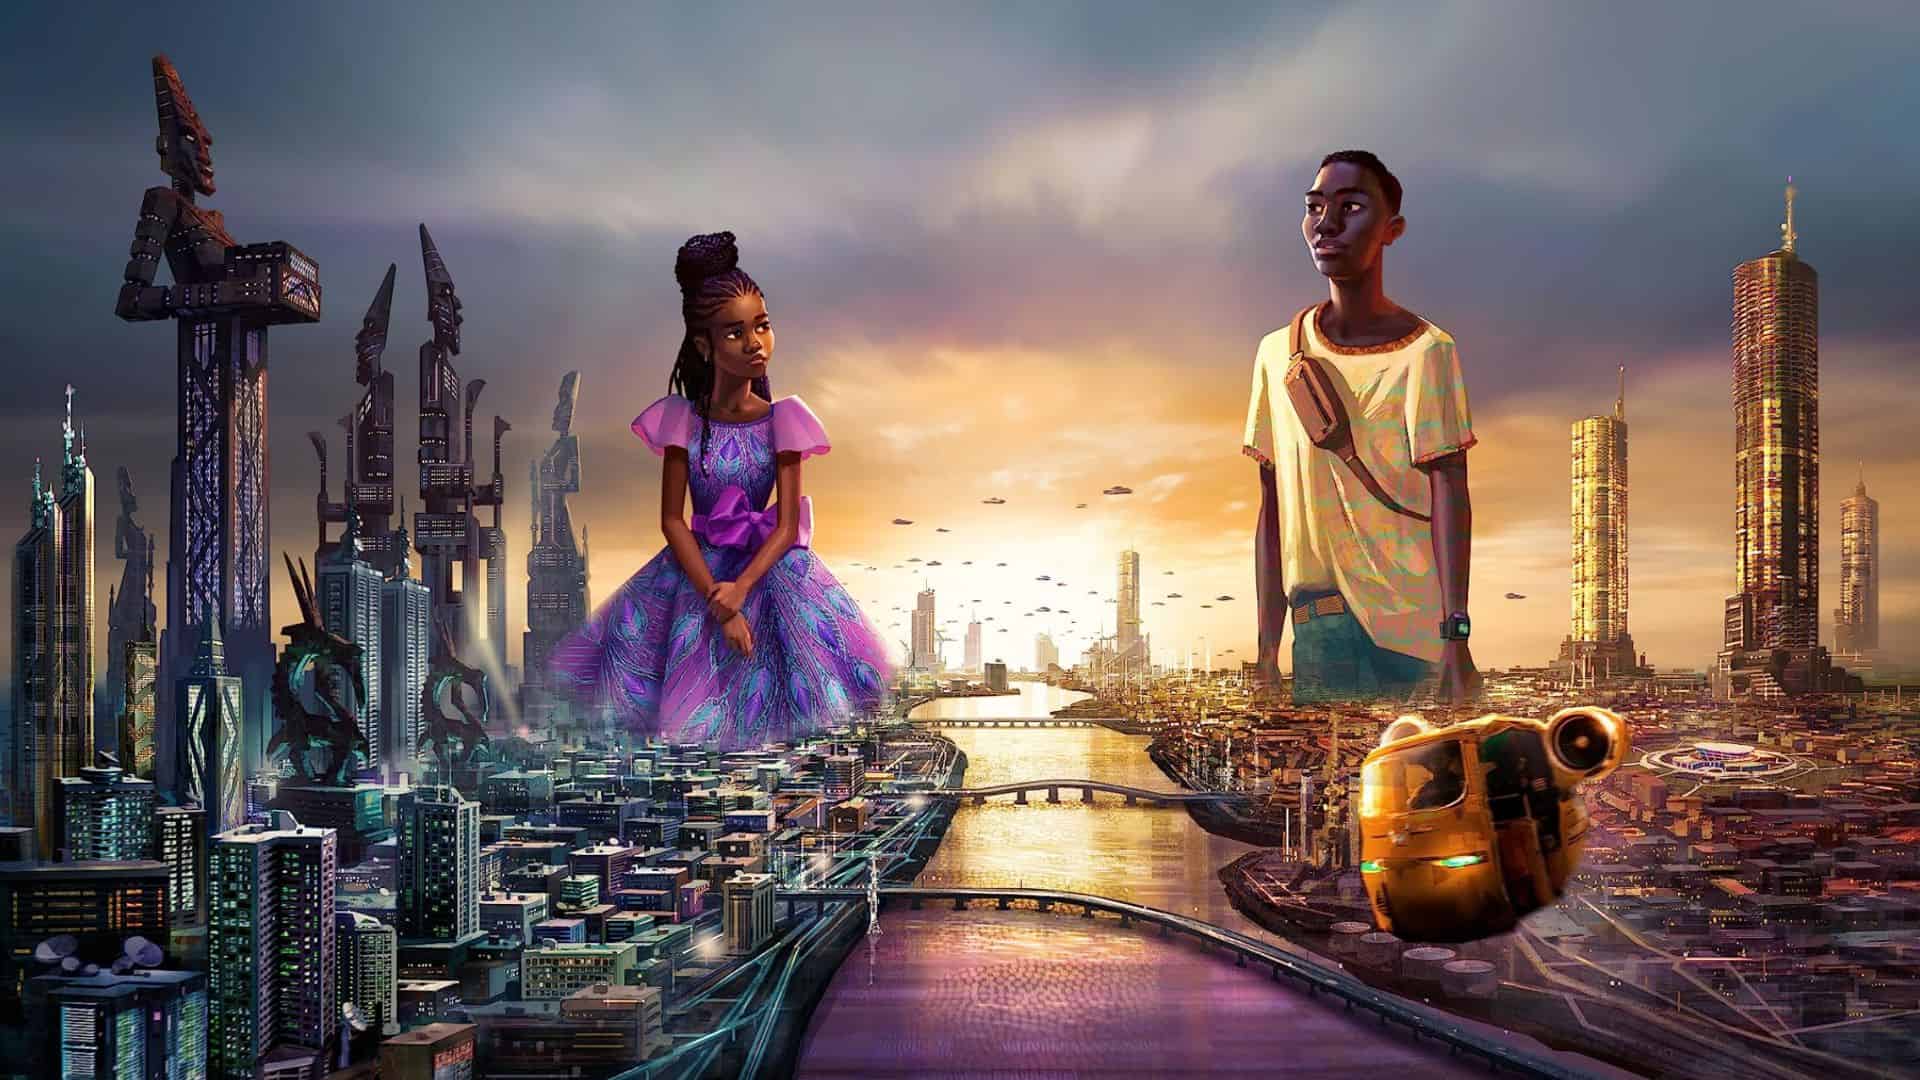 A girl in a purple dress looks at a boy in a yellow shirt over a futuristic cityscape in this image from Walt Disney Studios